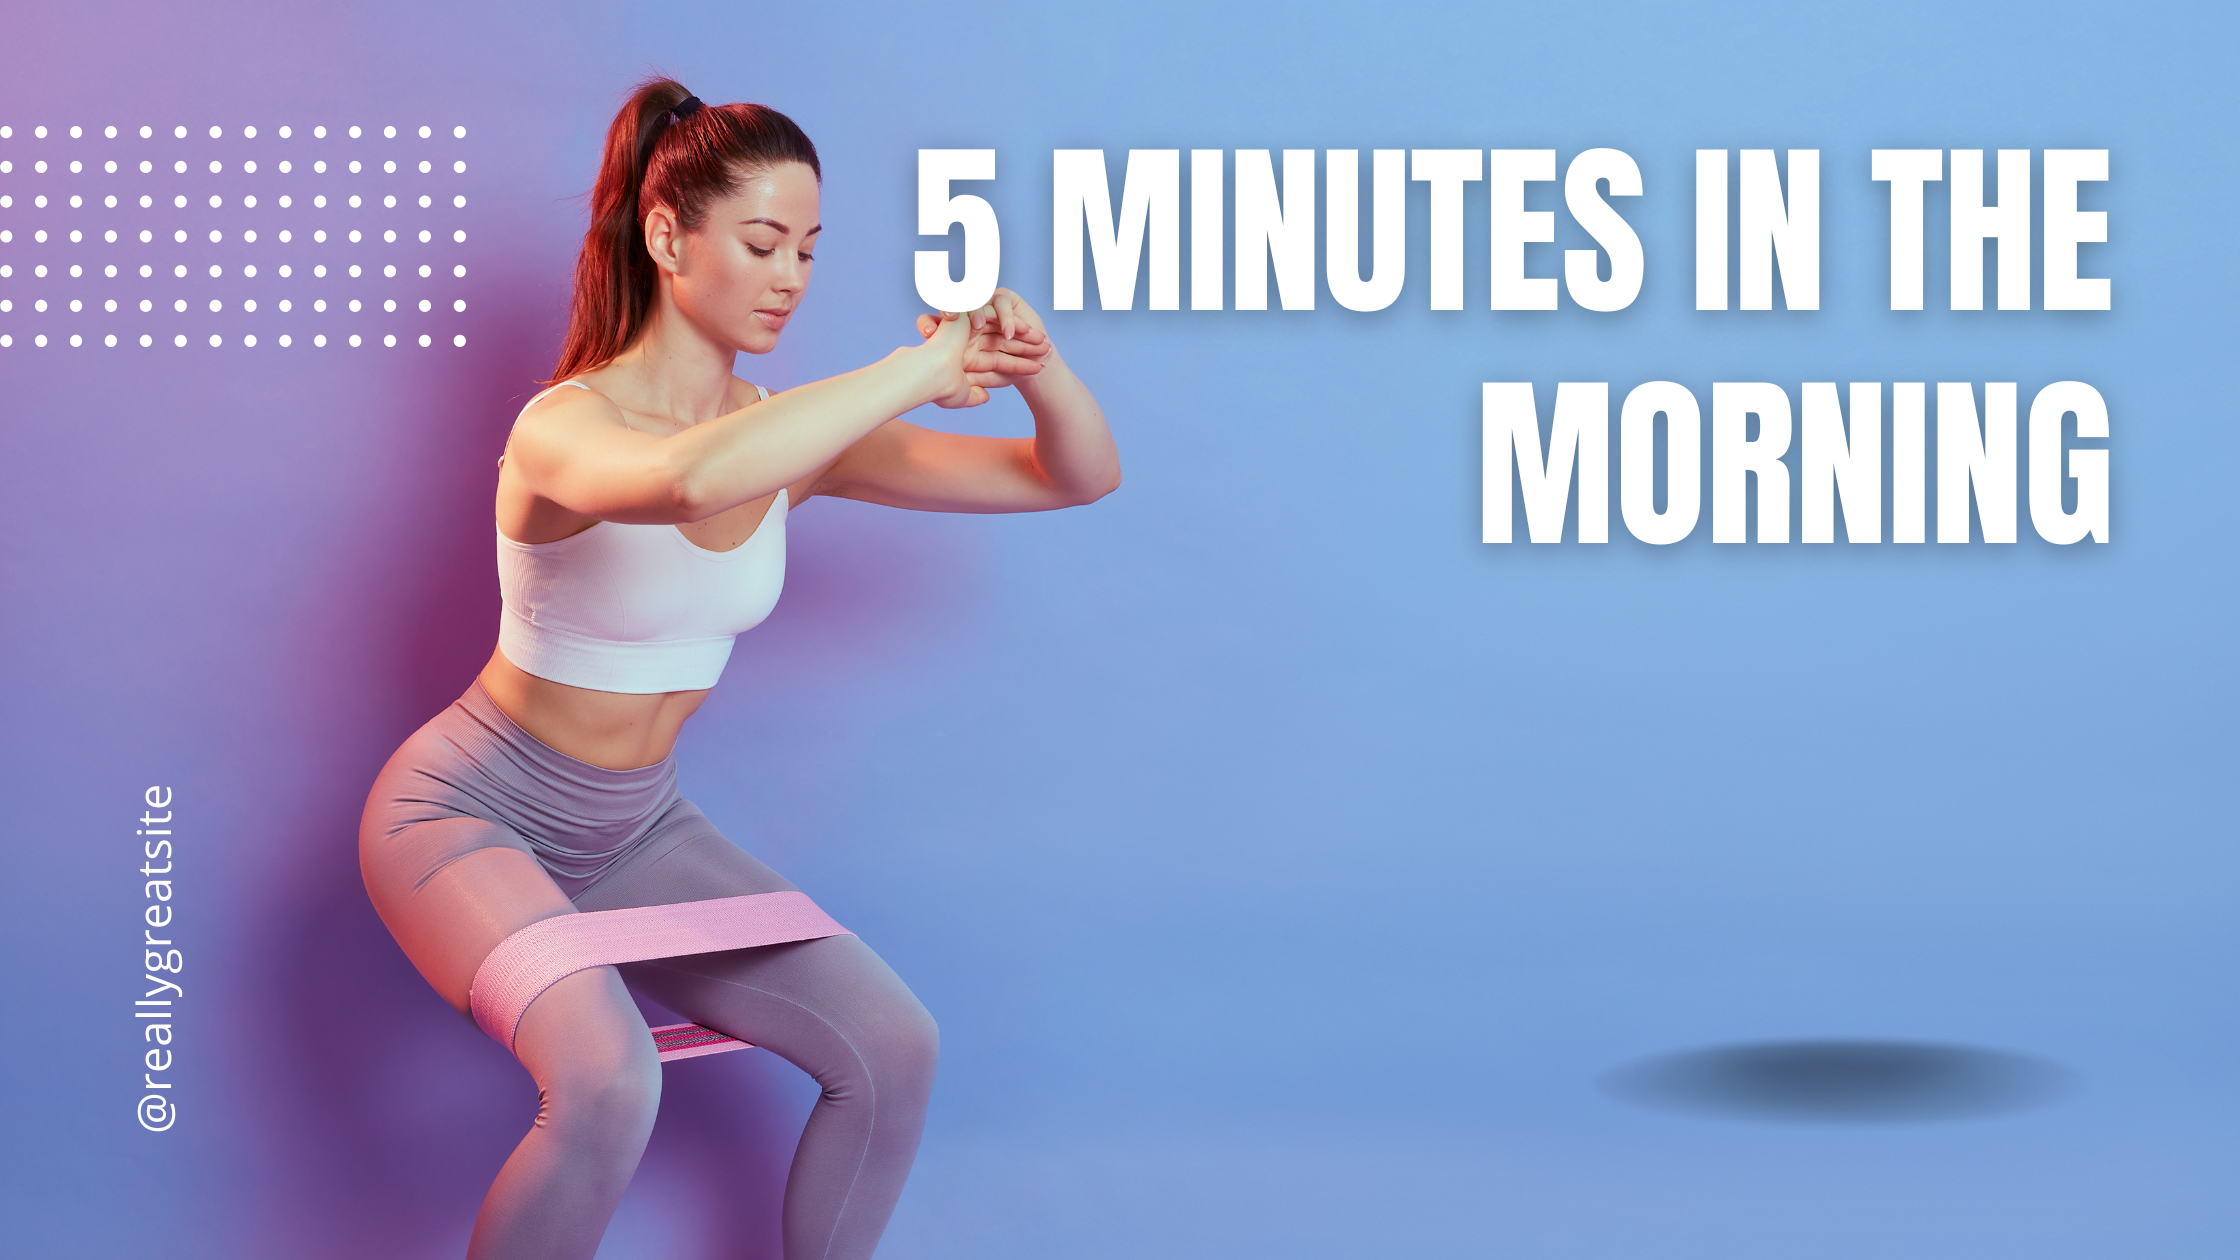 Just 5 minutes of exercise a day